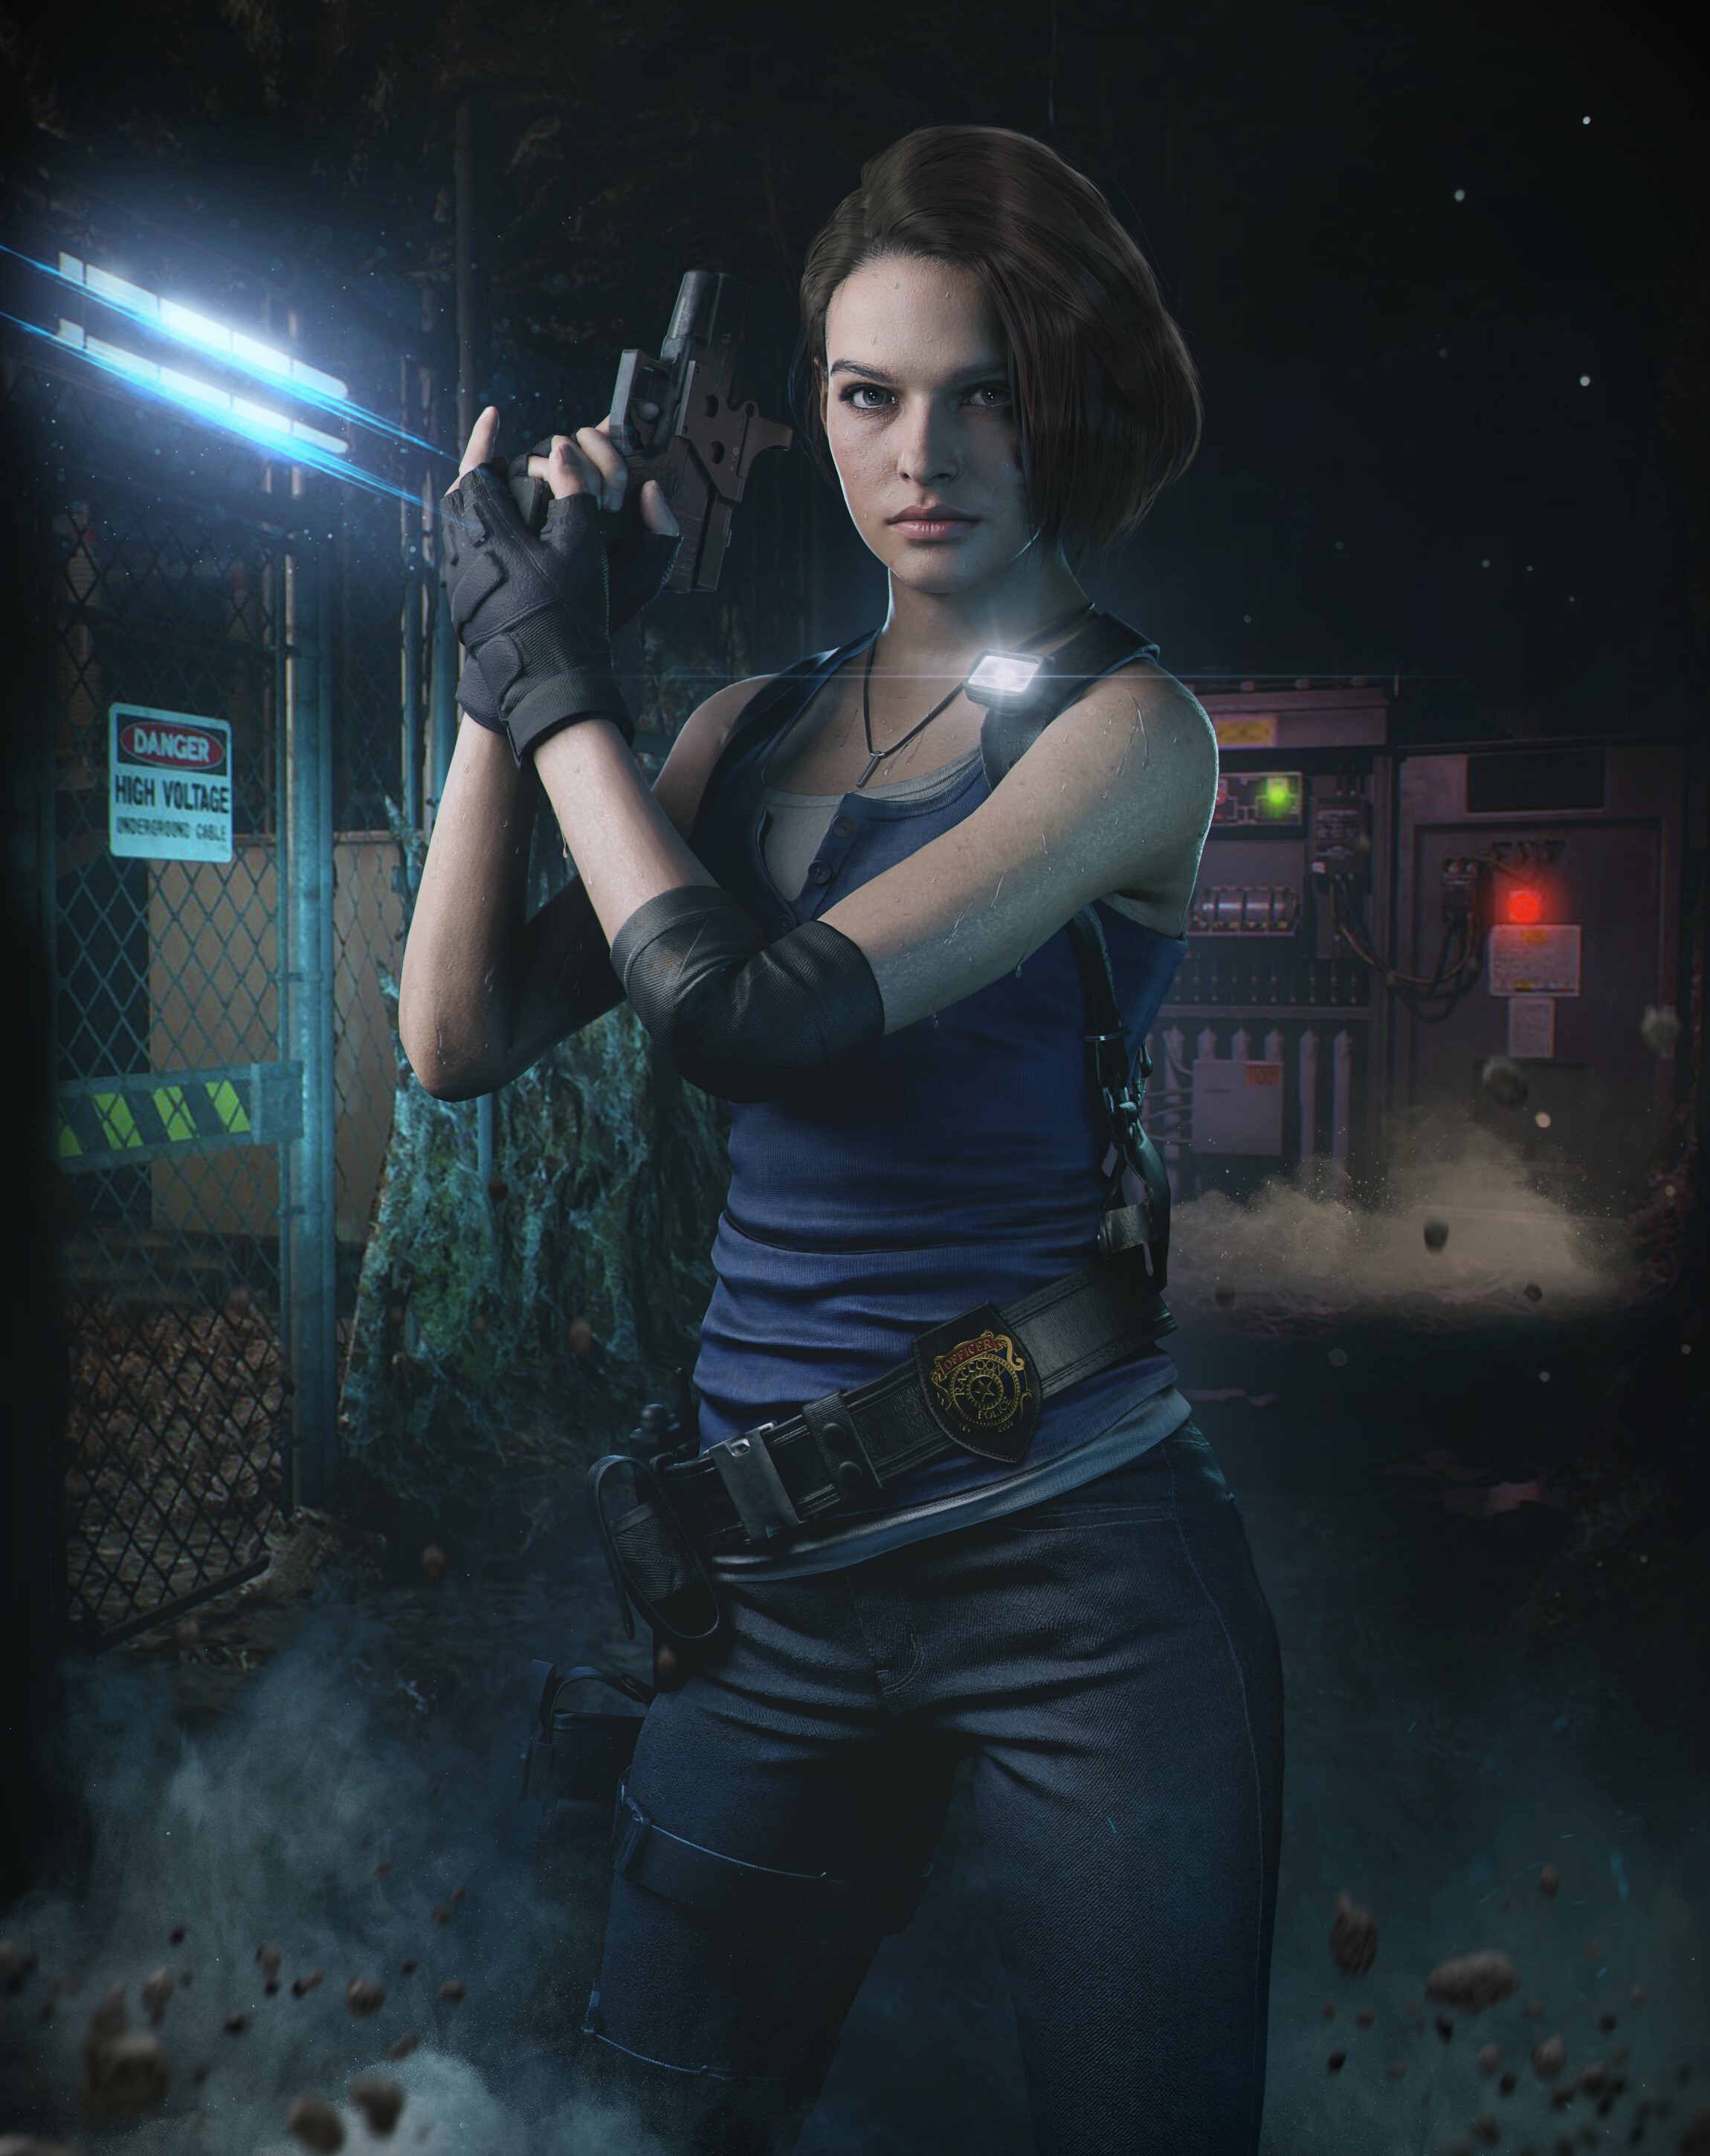 Jill Valentine screenshots, images and pictures - Giant Bomb